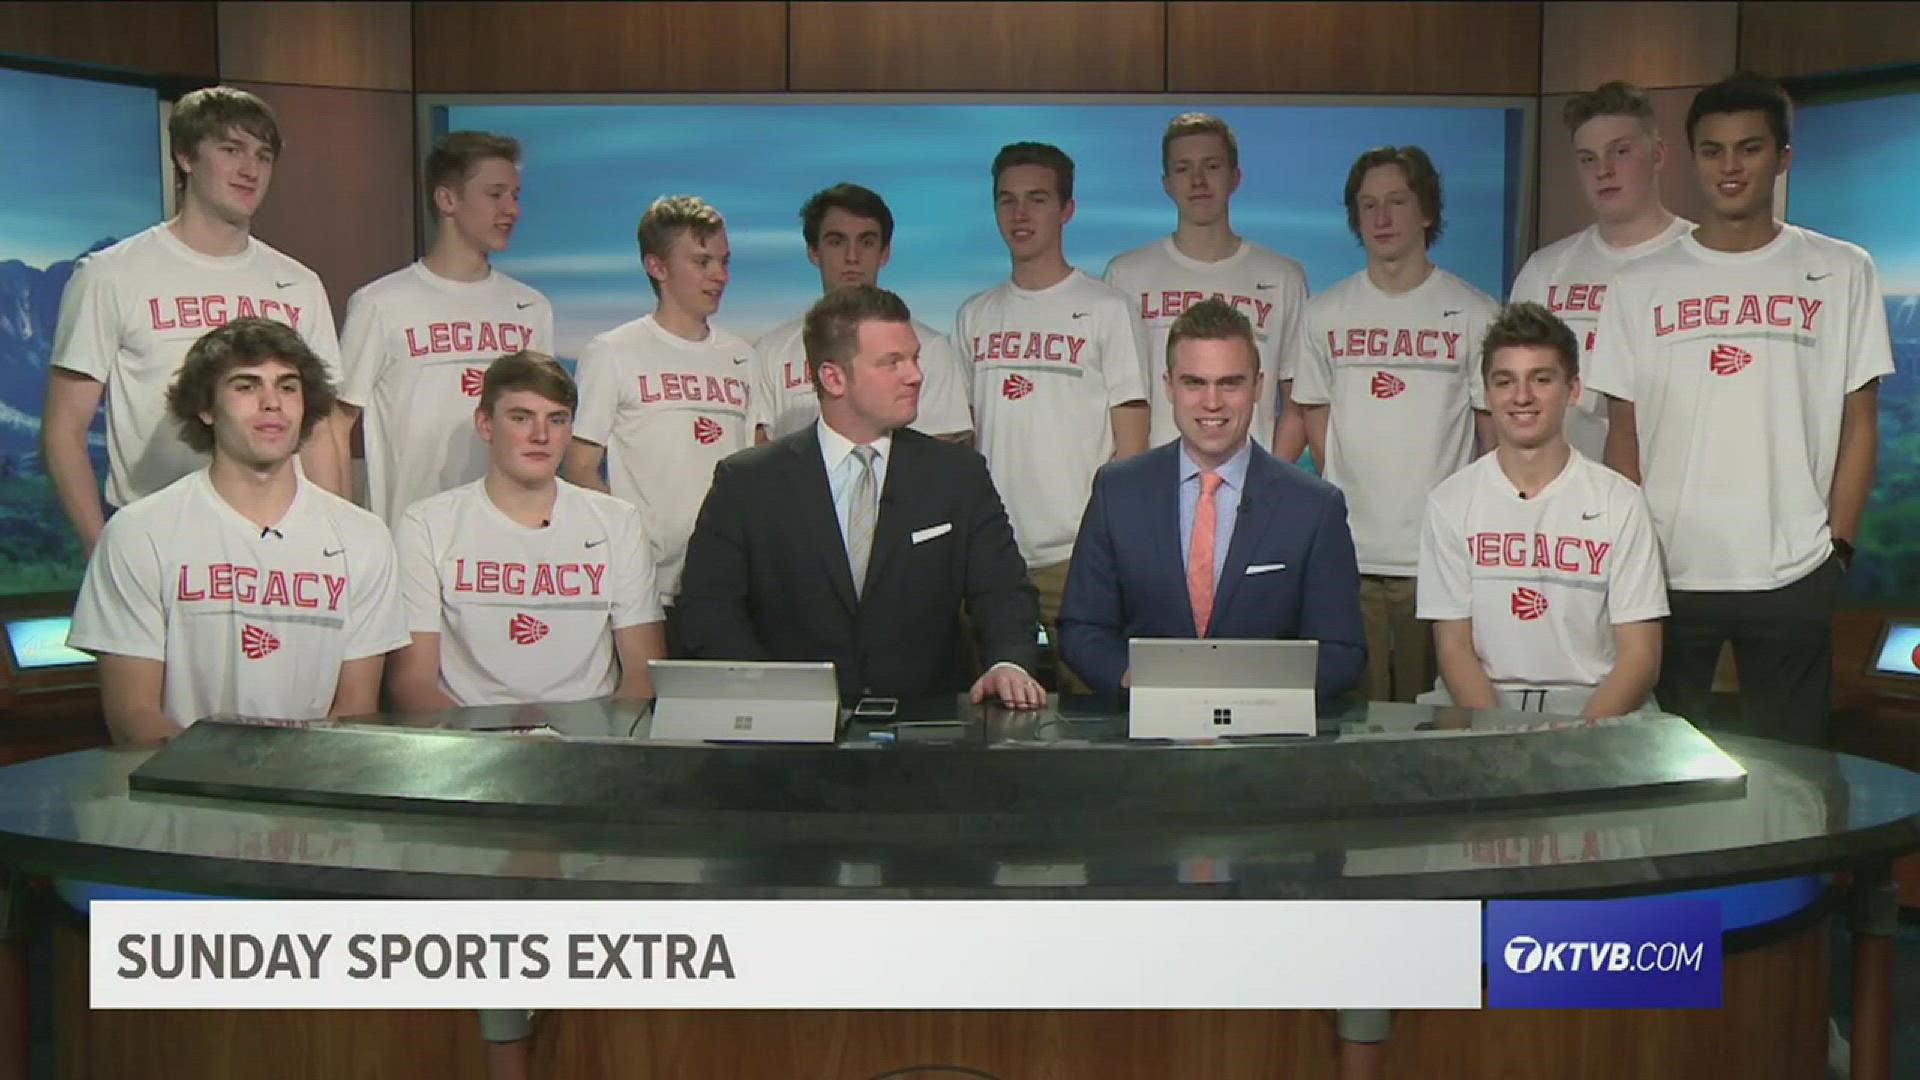 The Boise Braves boys varsity basketball team joined Jay Tust and Will Hall in studio